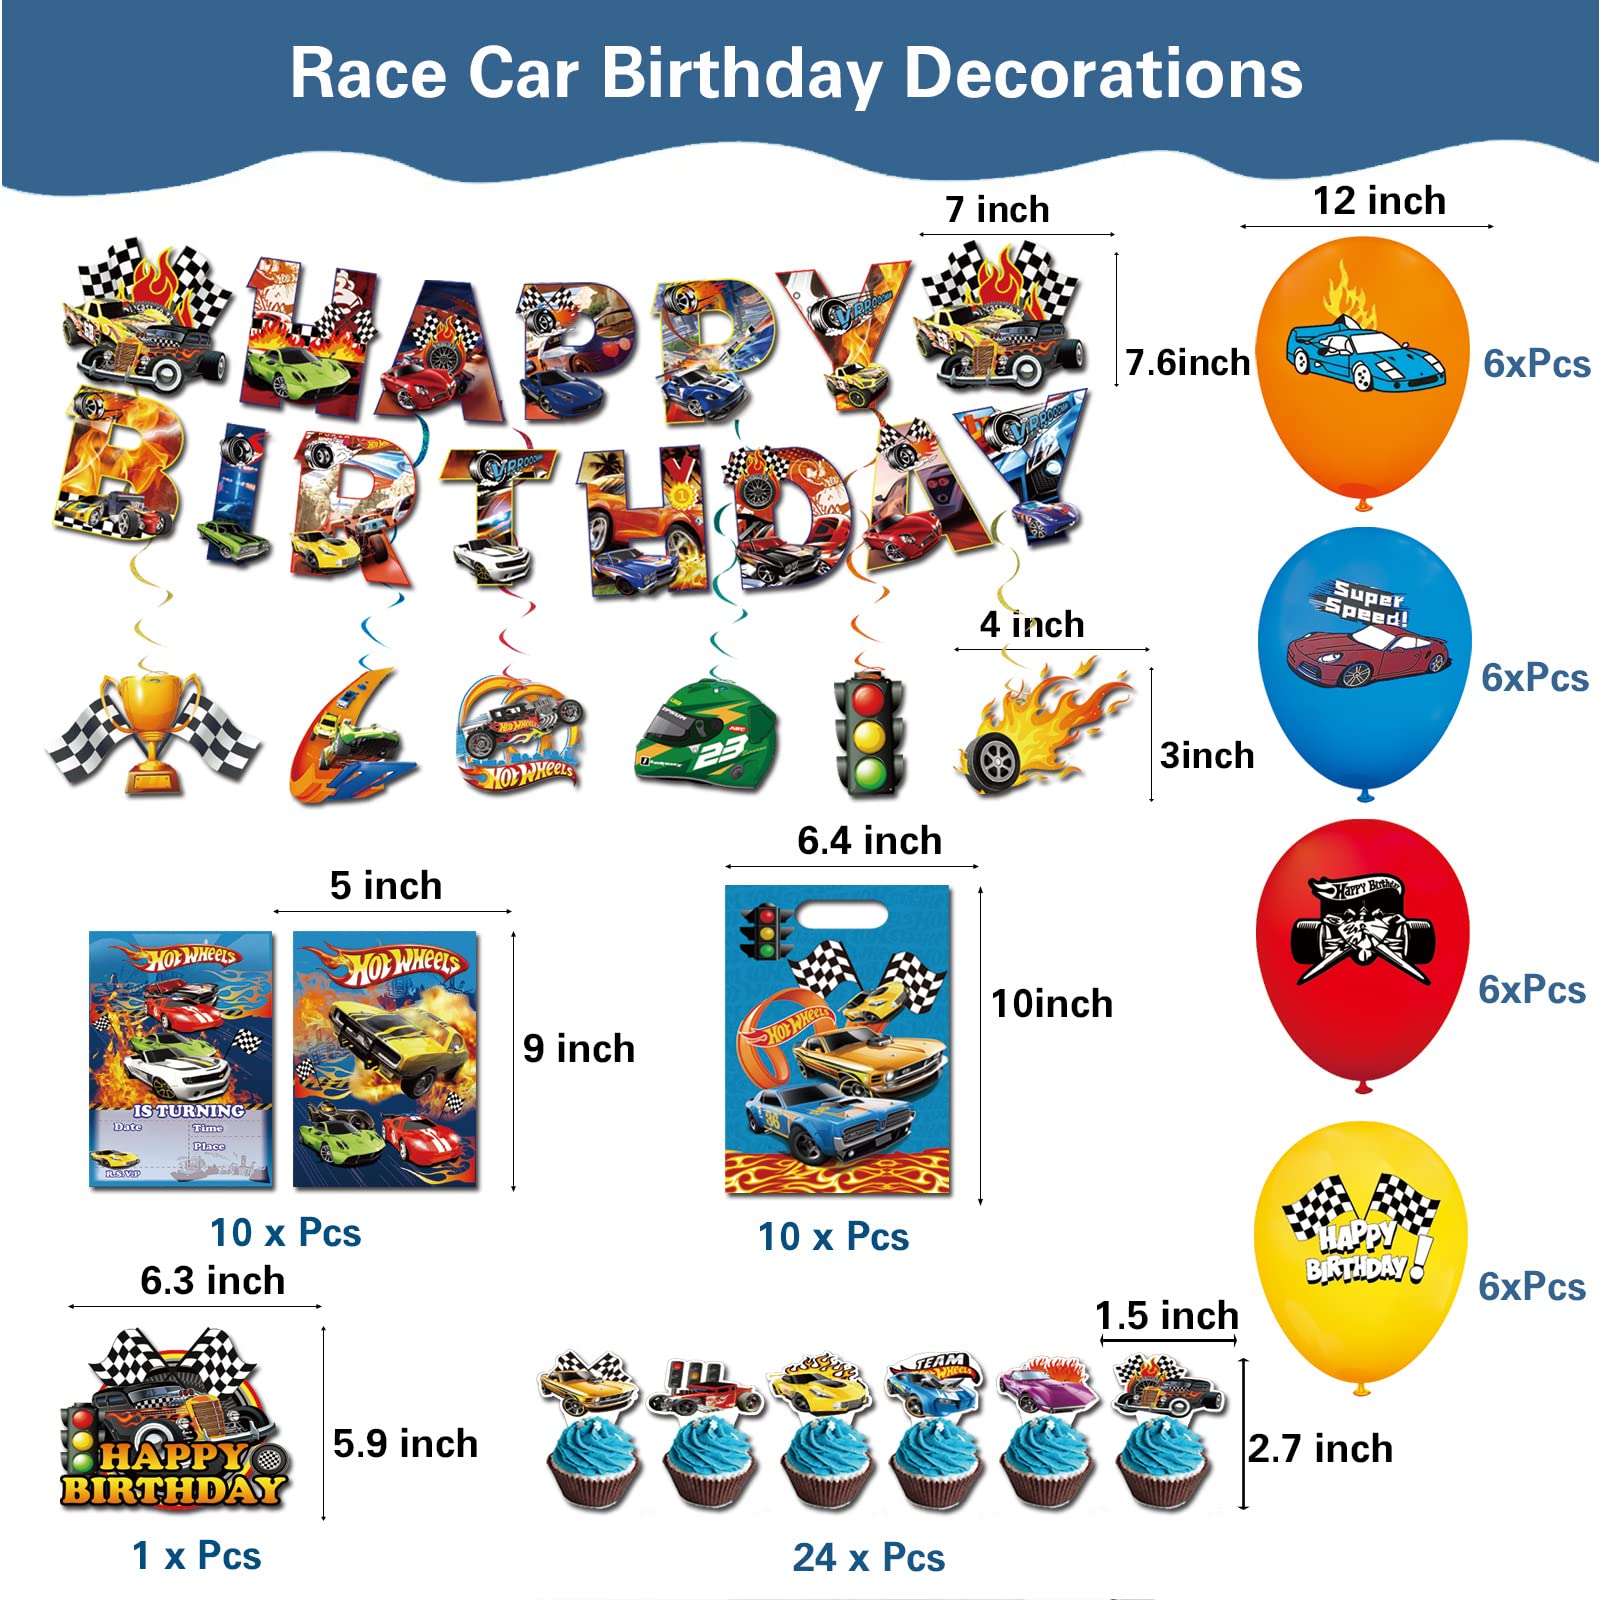 147 Pcs Hot Car Birthday Party Supplies,Included Banner,Hanging Swirls,Tablecloth,Cake Topper,Cupcake Toppers,Gift Bag, Invitation Card,Balloon,Racing Car Tableware Set for Boy Party Decorations